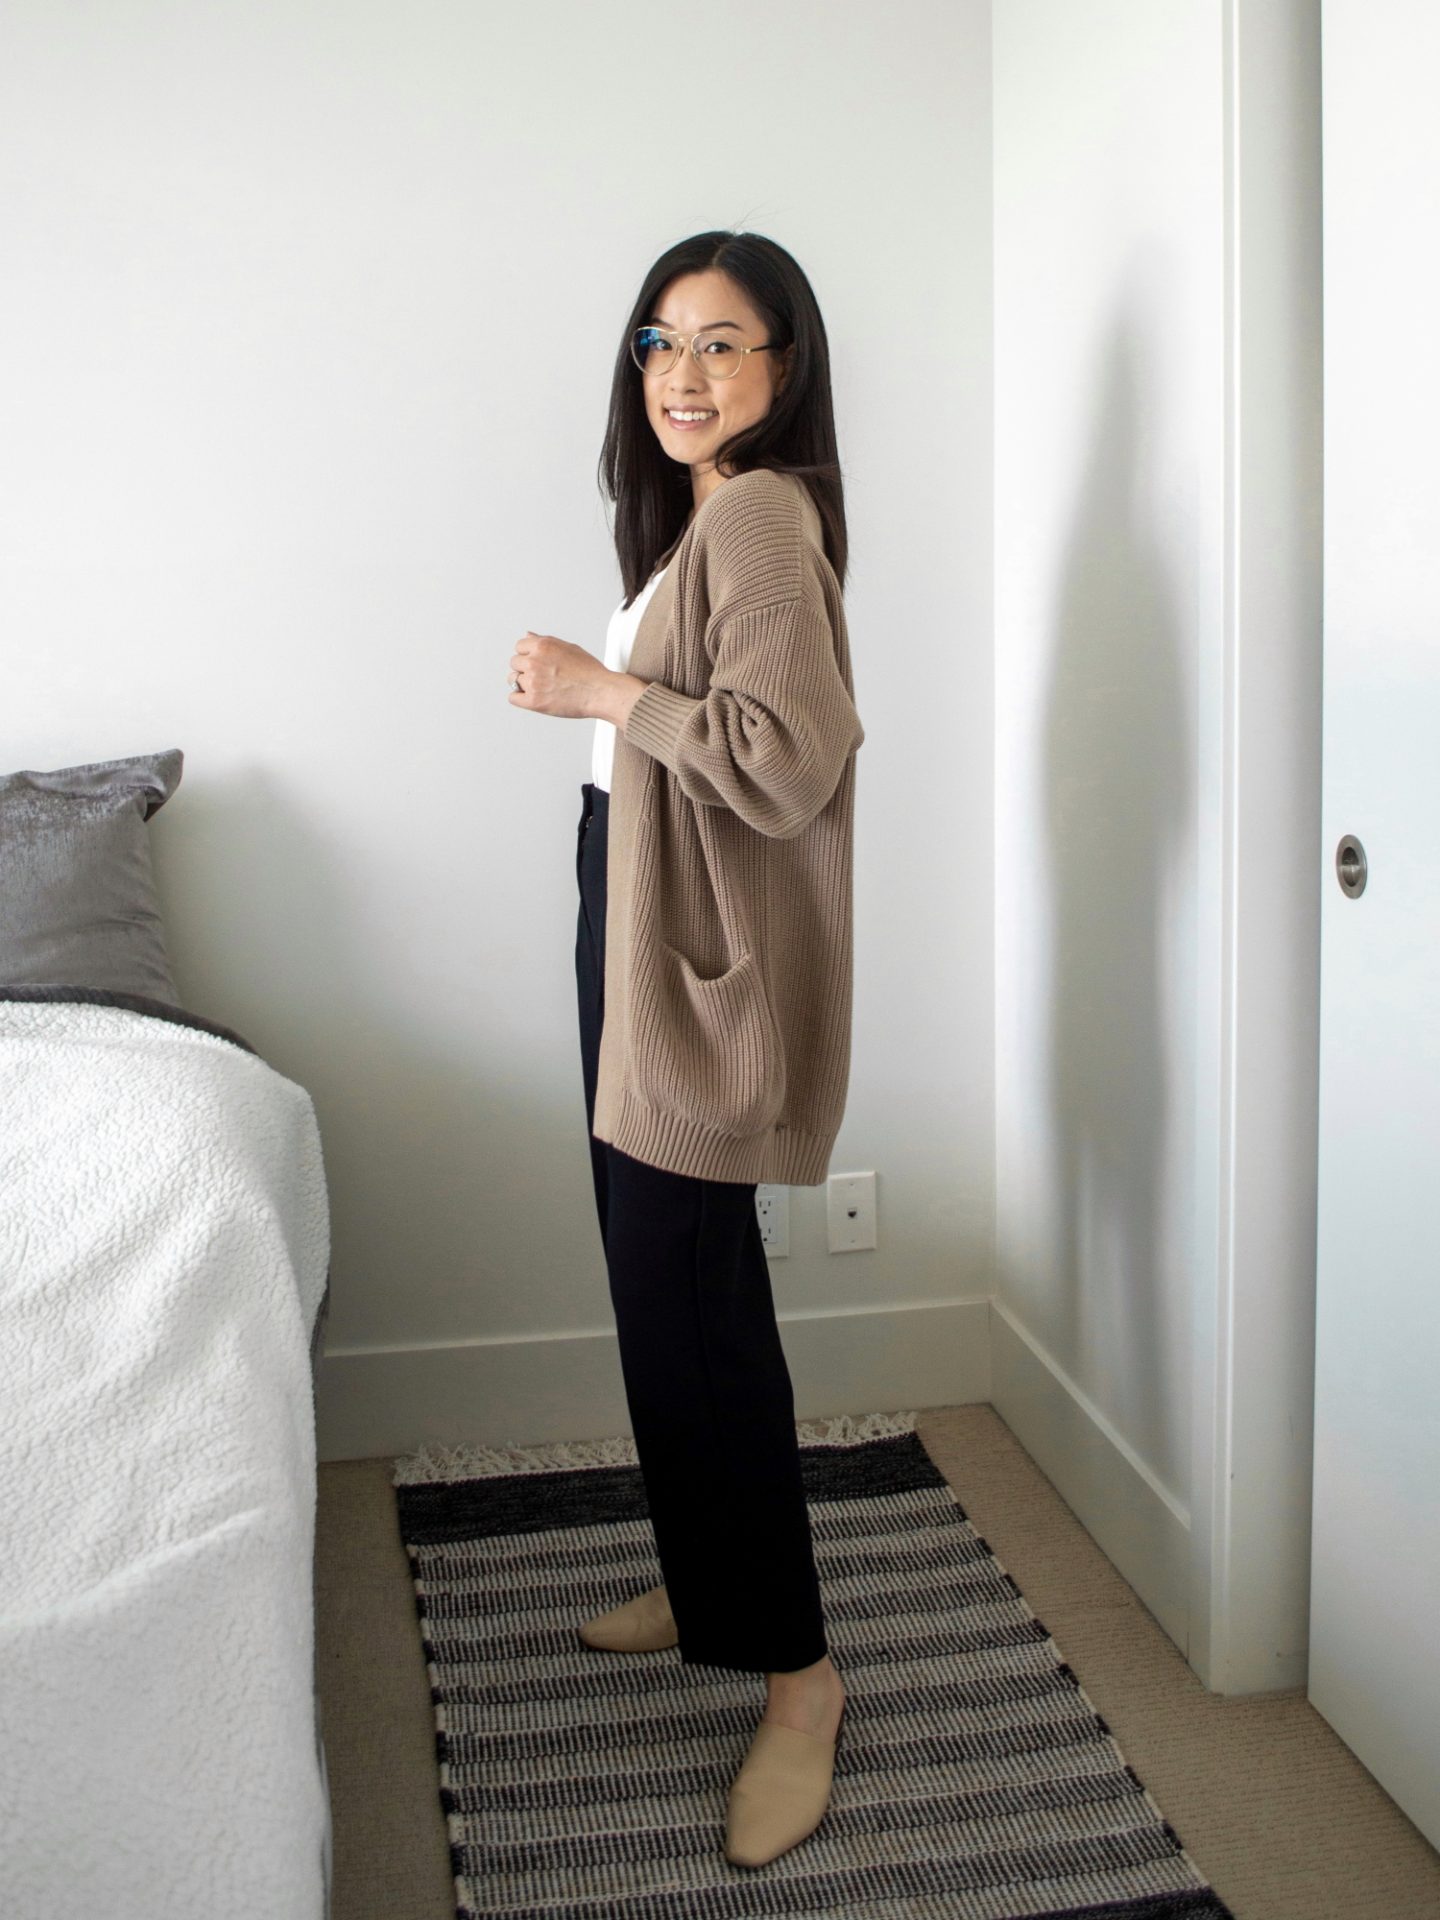 Her Simple Sole - outfit details: cozy oversized cardigan, white henley top, black trousers, nude coloured mules